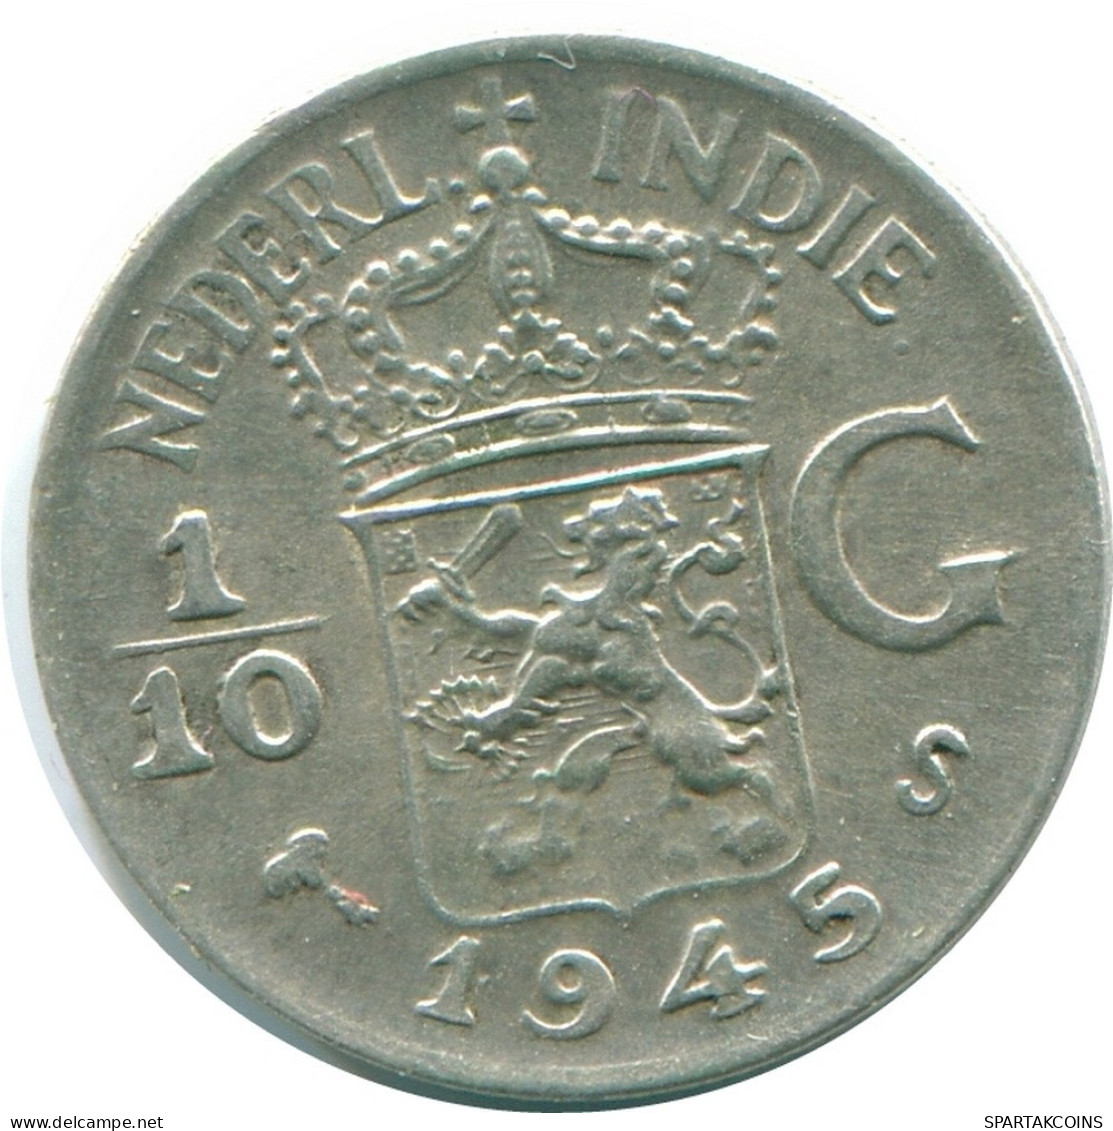 1/10 GULDEN 1945 S NETHERLANDS EAST INDIES SILVER Colonial Coin #NL14004.3.U.A - Dutch East Indies